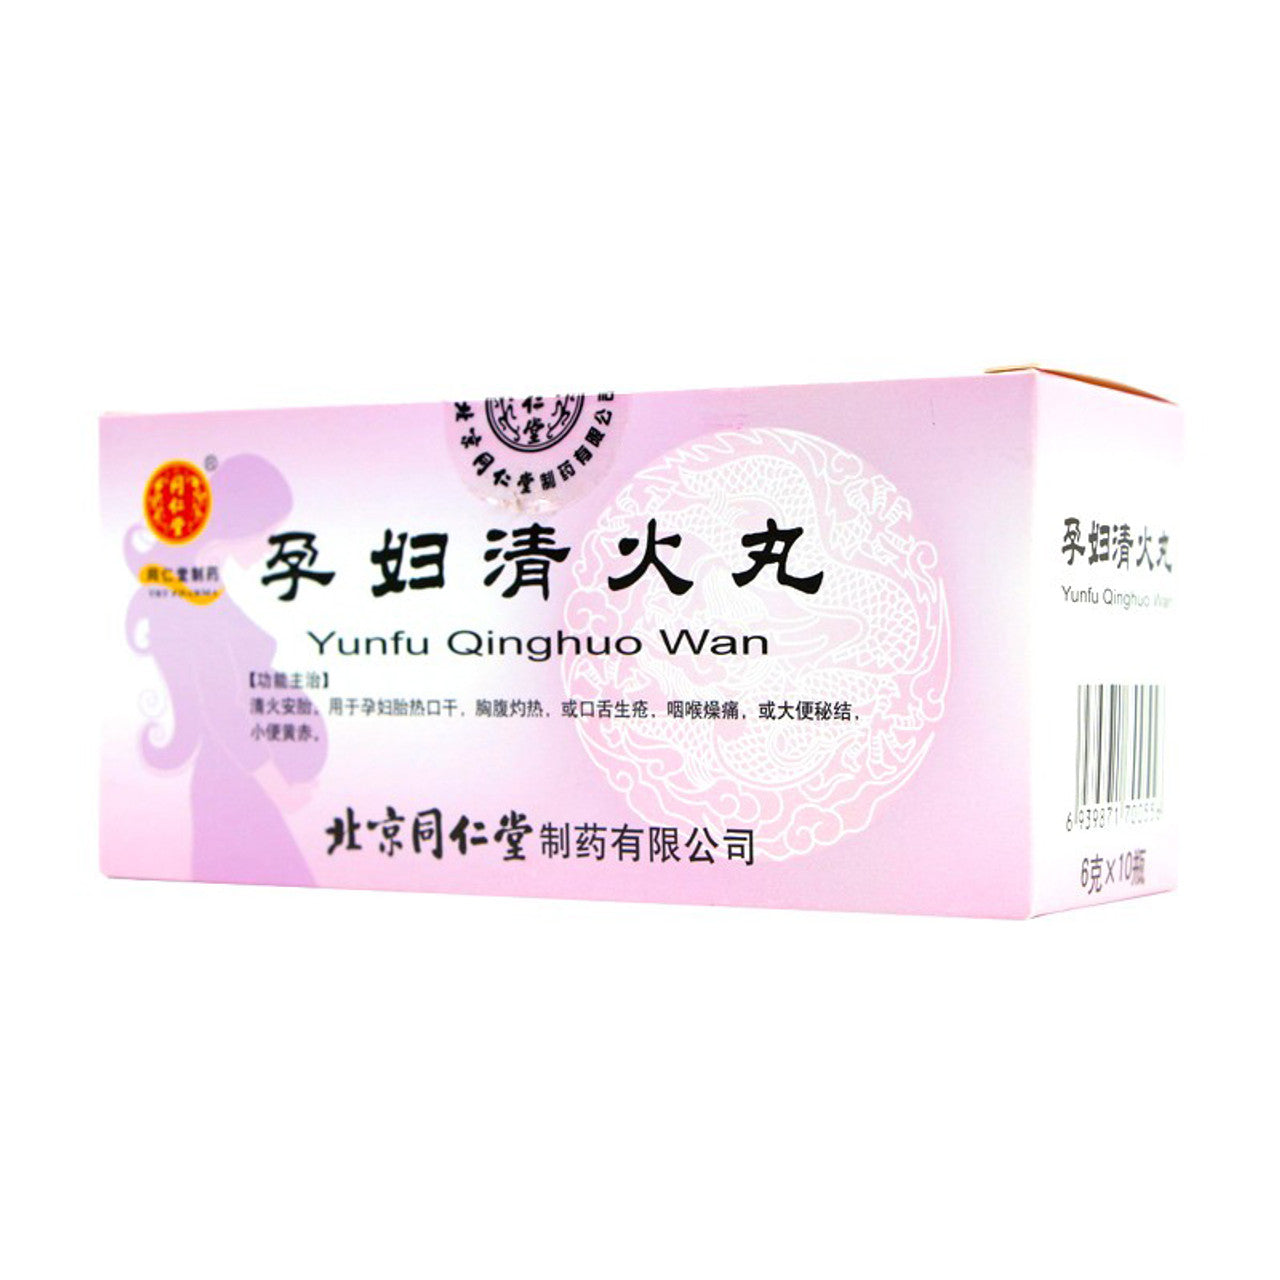 China Herb. Brand Tongrentang. Yunfu Qinghuo Wan or Yun Fu Qing Huo Wan or Yunfu Qinghuo Pills for pregnant women with fetal heat, dry mouth, burning chest and abdomen, or sore mouth and tongue, dry throat, or constipation, yellow and red urine.